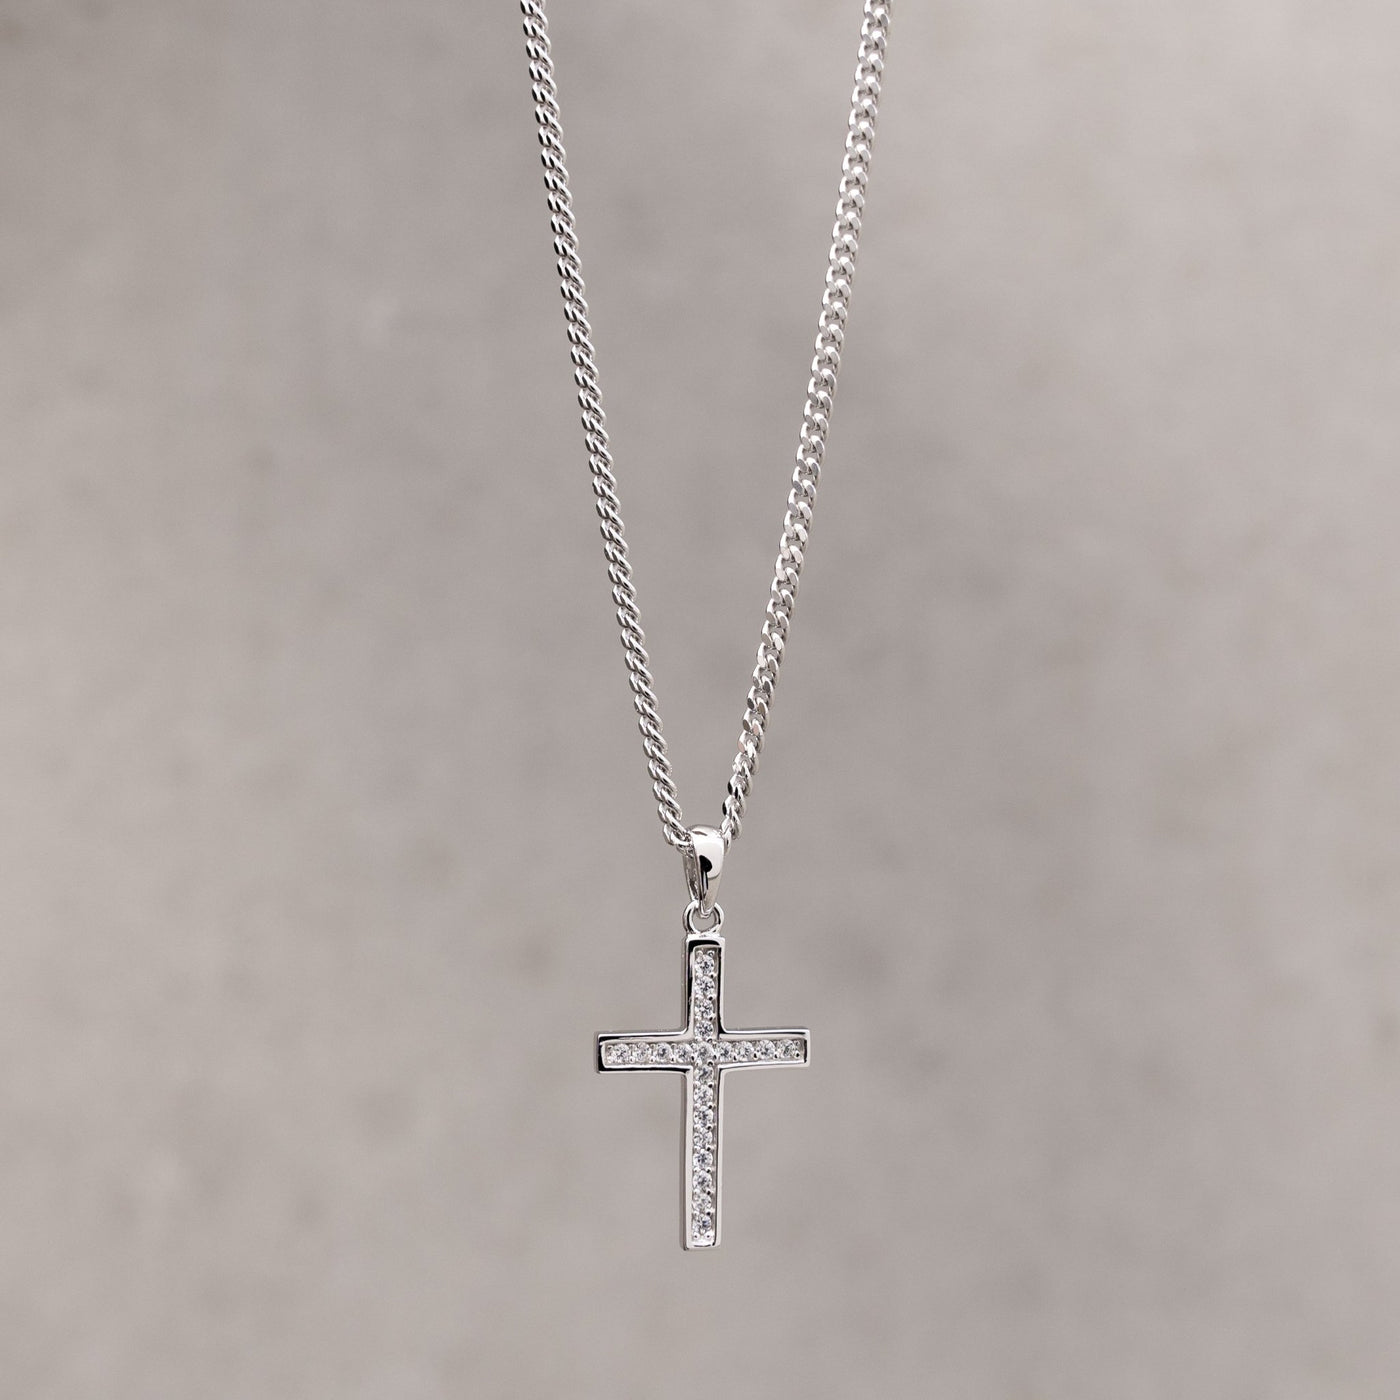 CROSS NECKLACE ICED OUT 925 SILVER RHODIUM PLATED - IDENTIM®